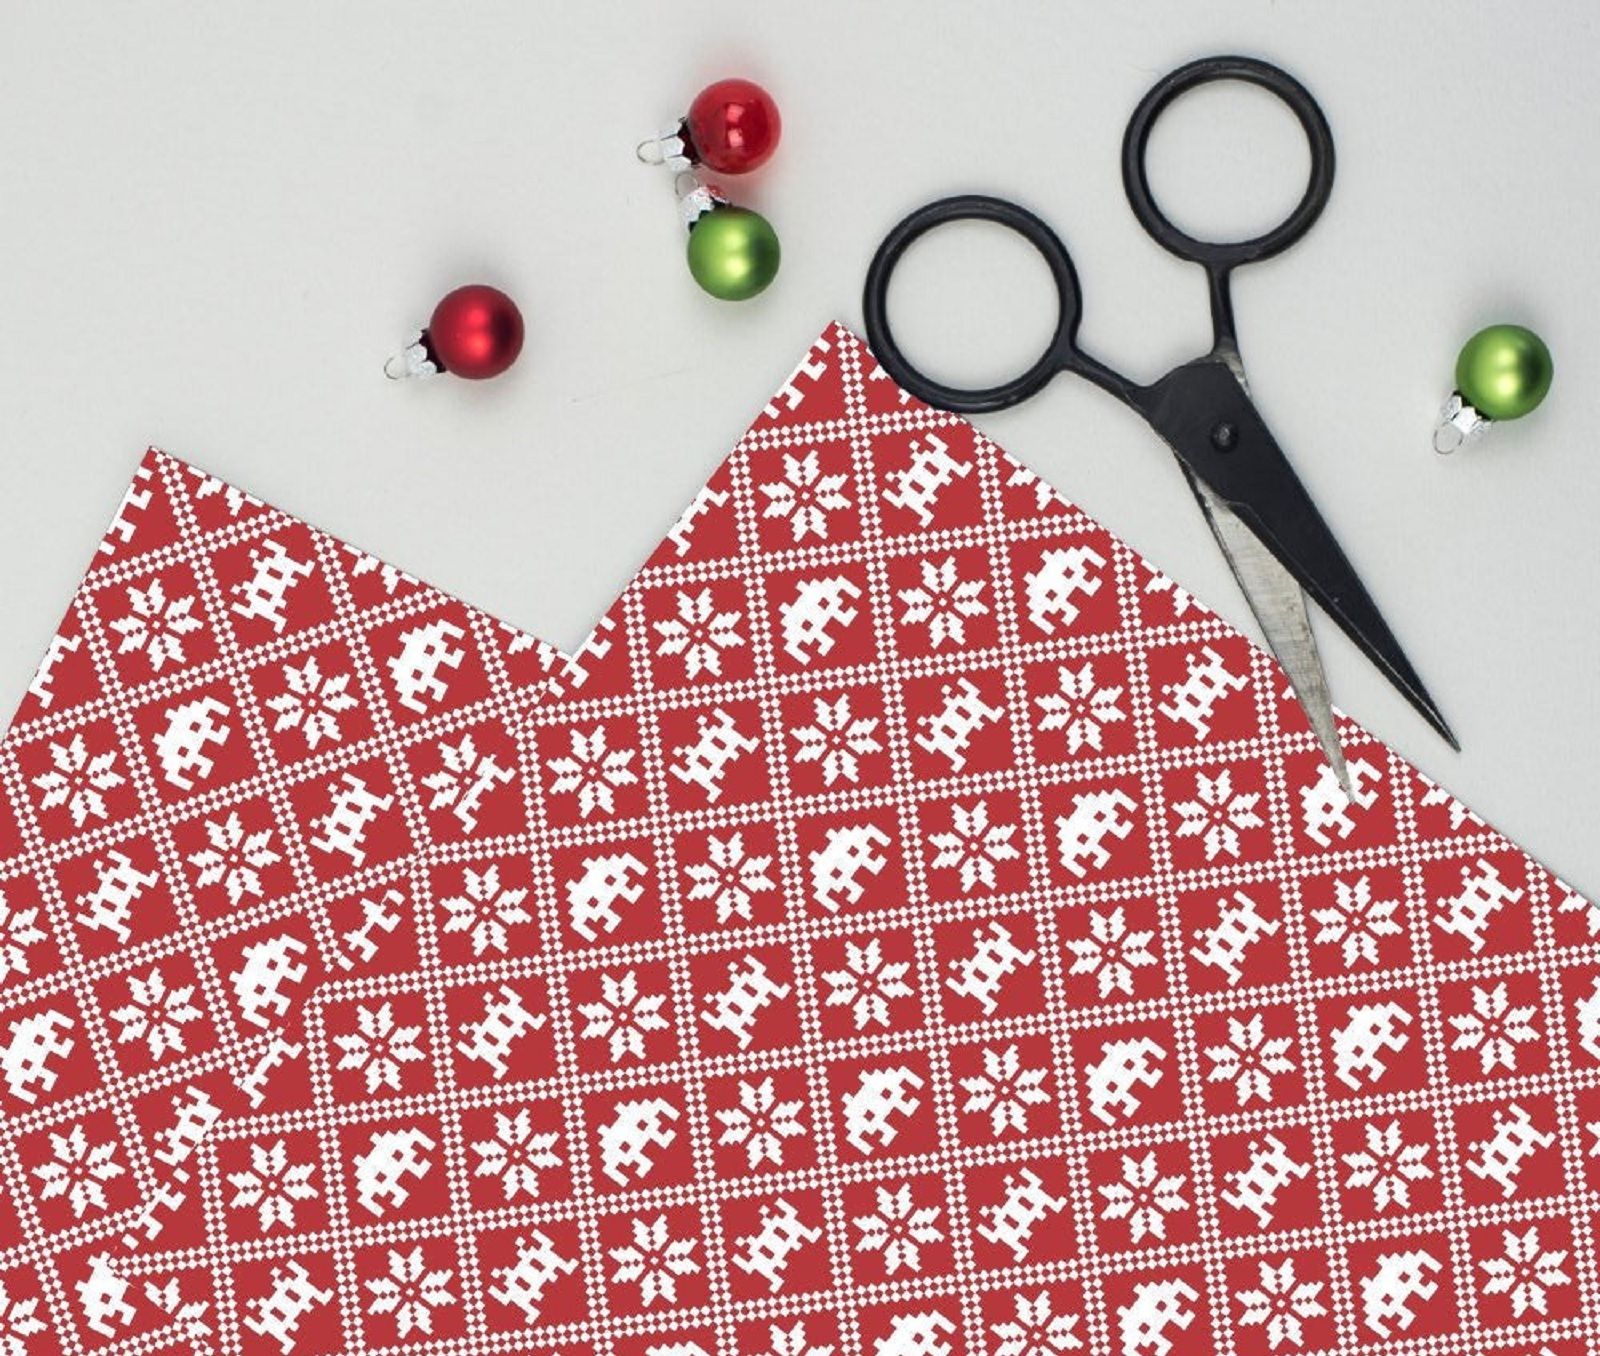 34 Geeky Wrapping Papers To Use On Christmas Gifts This Year image 32